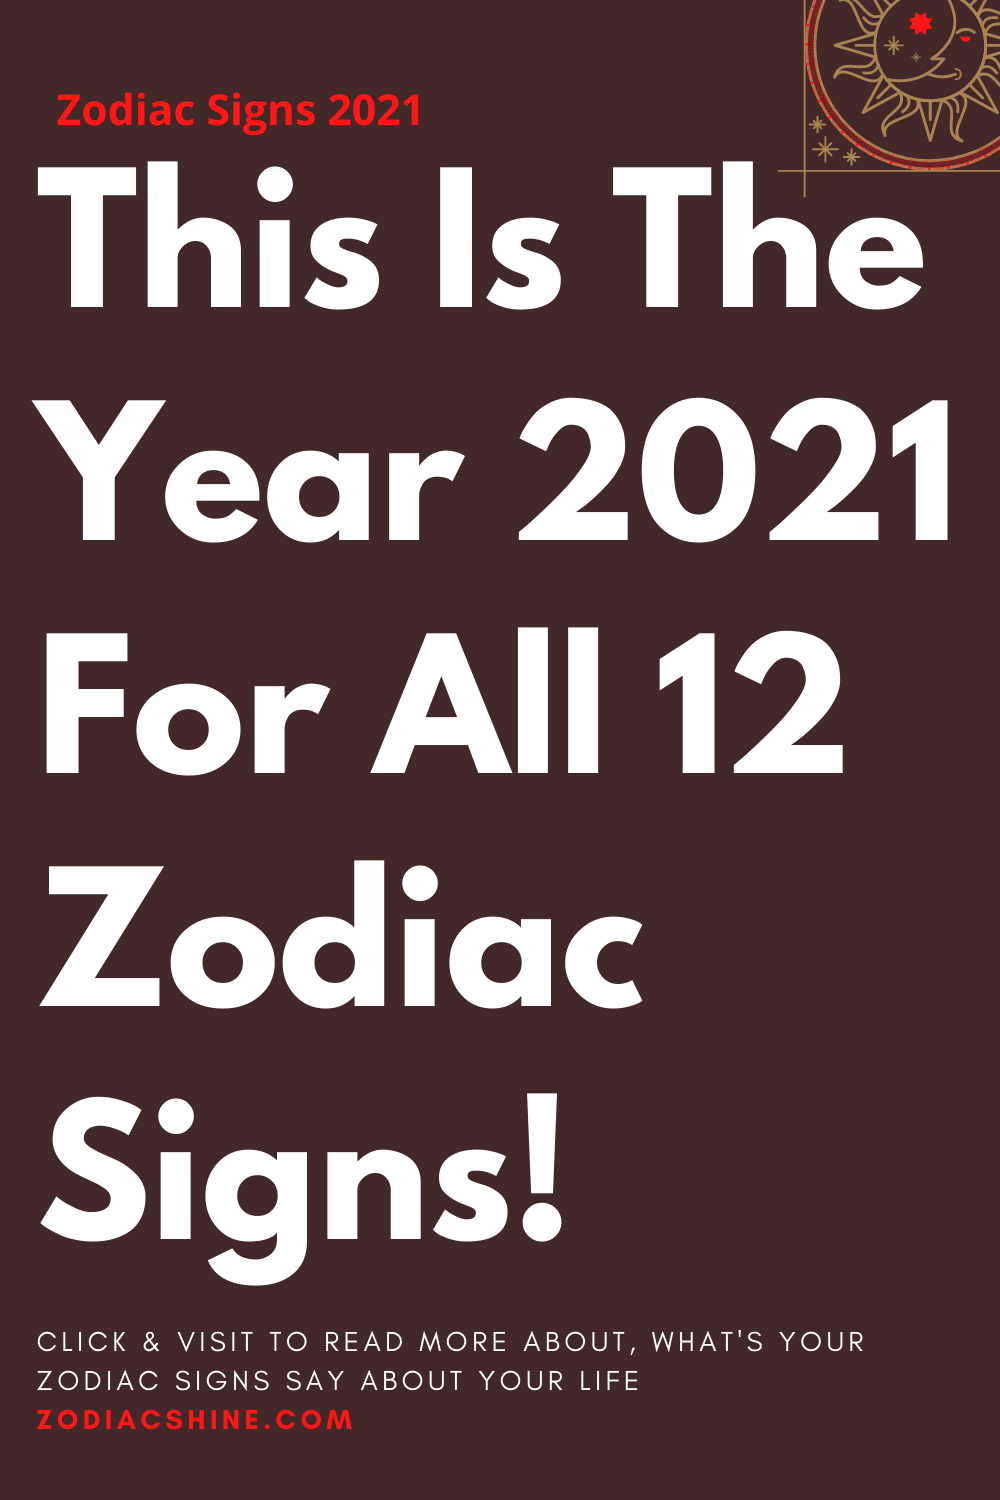 This Is The Year 2021 For All 12 Zodiac Signs!